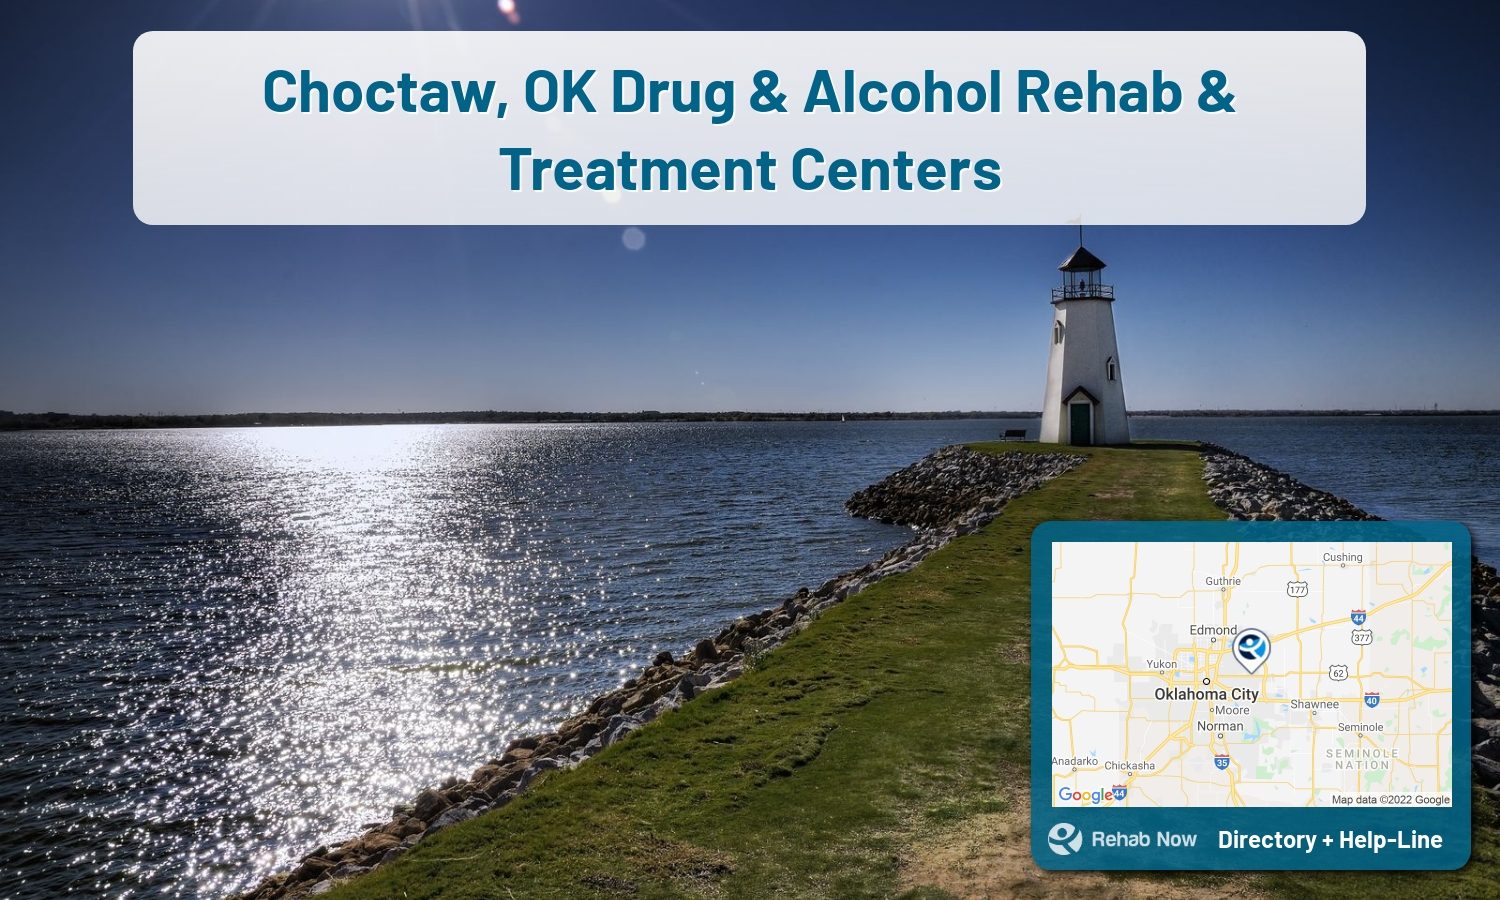 Need treatment nearby in Choctaw, Oklahoma? Choose a drug/alcohol rehab center from our list, or call our hotline now for free help.